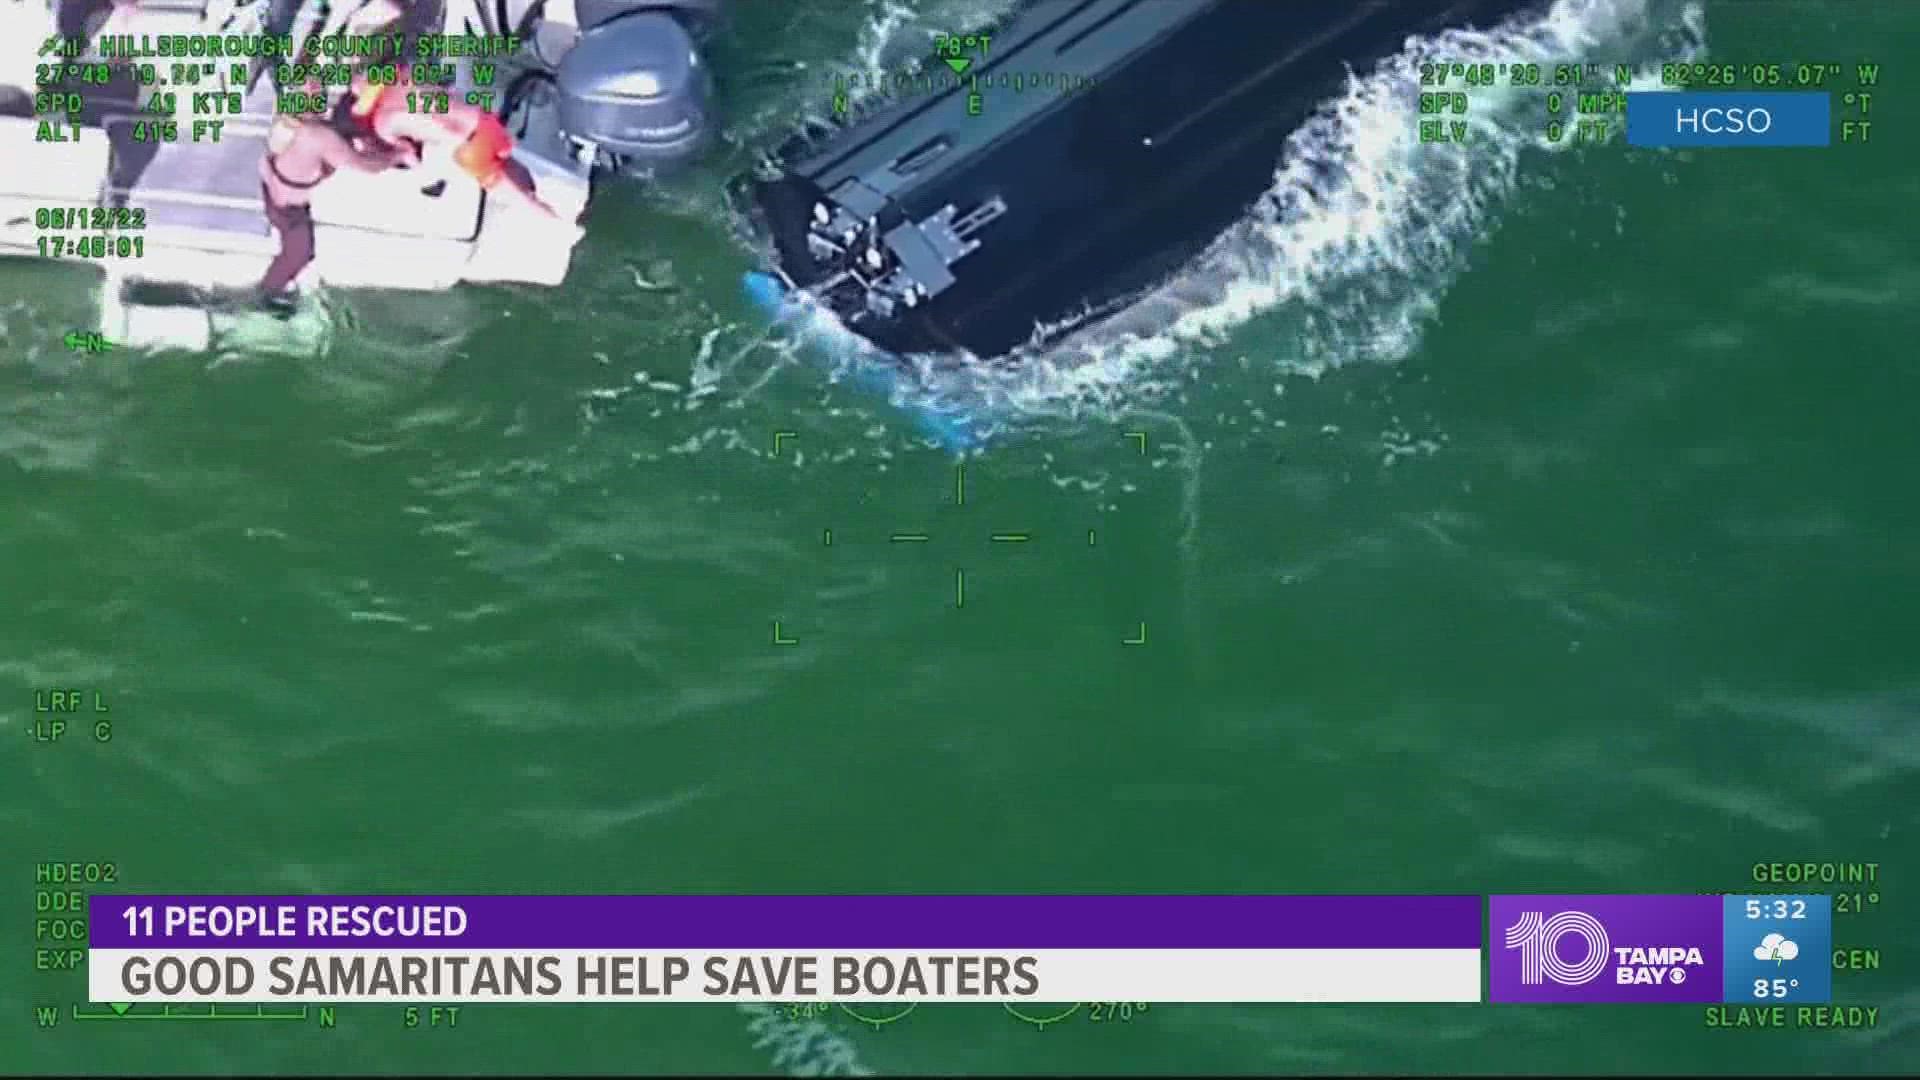 Eleven people including children were stranded and hanging onto the overturned boat.